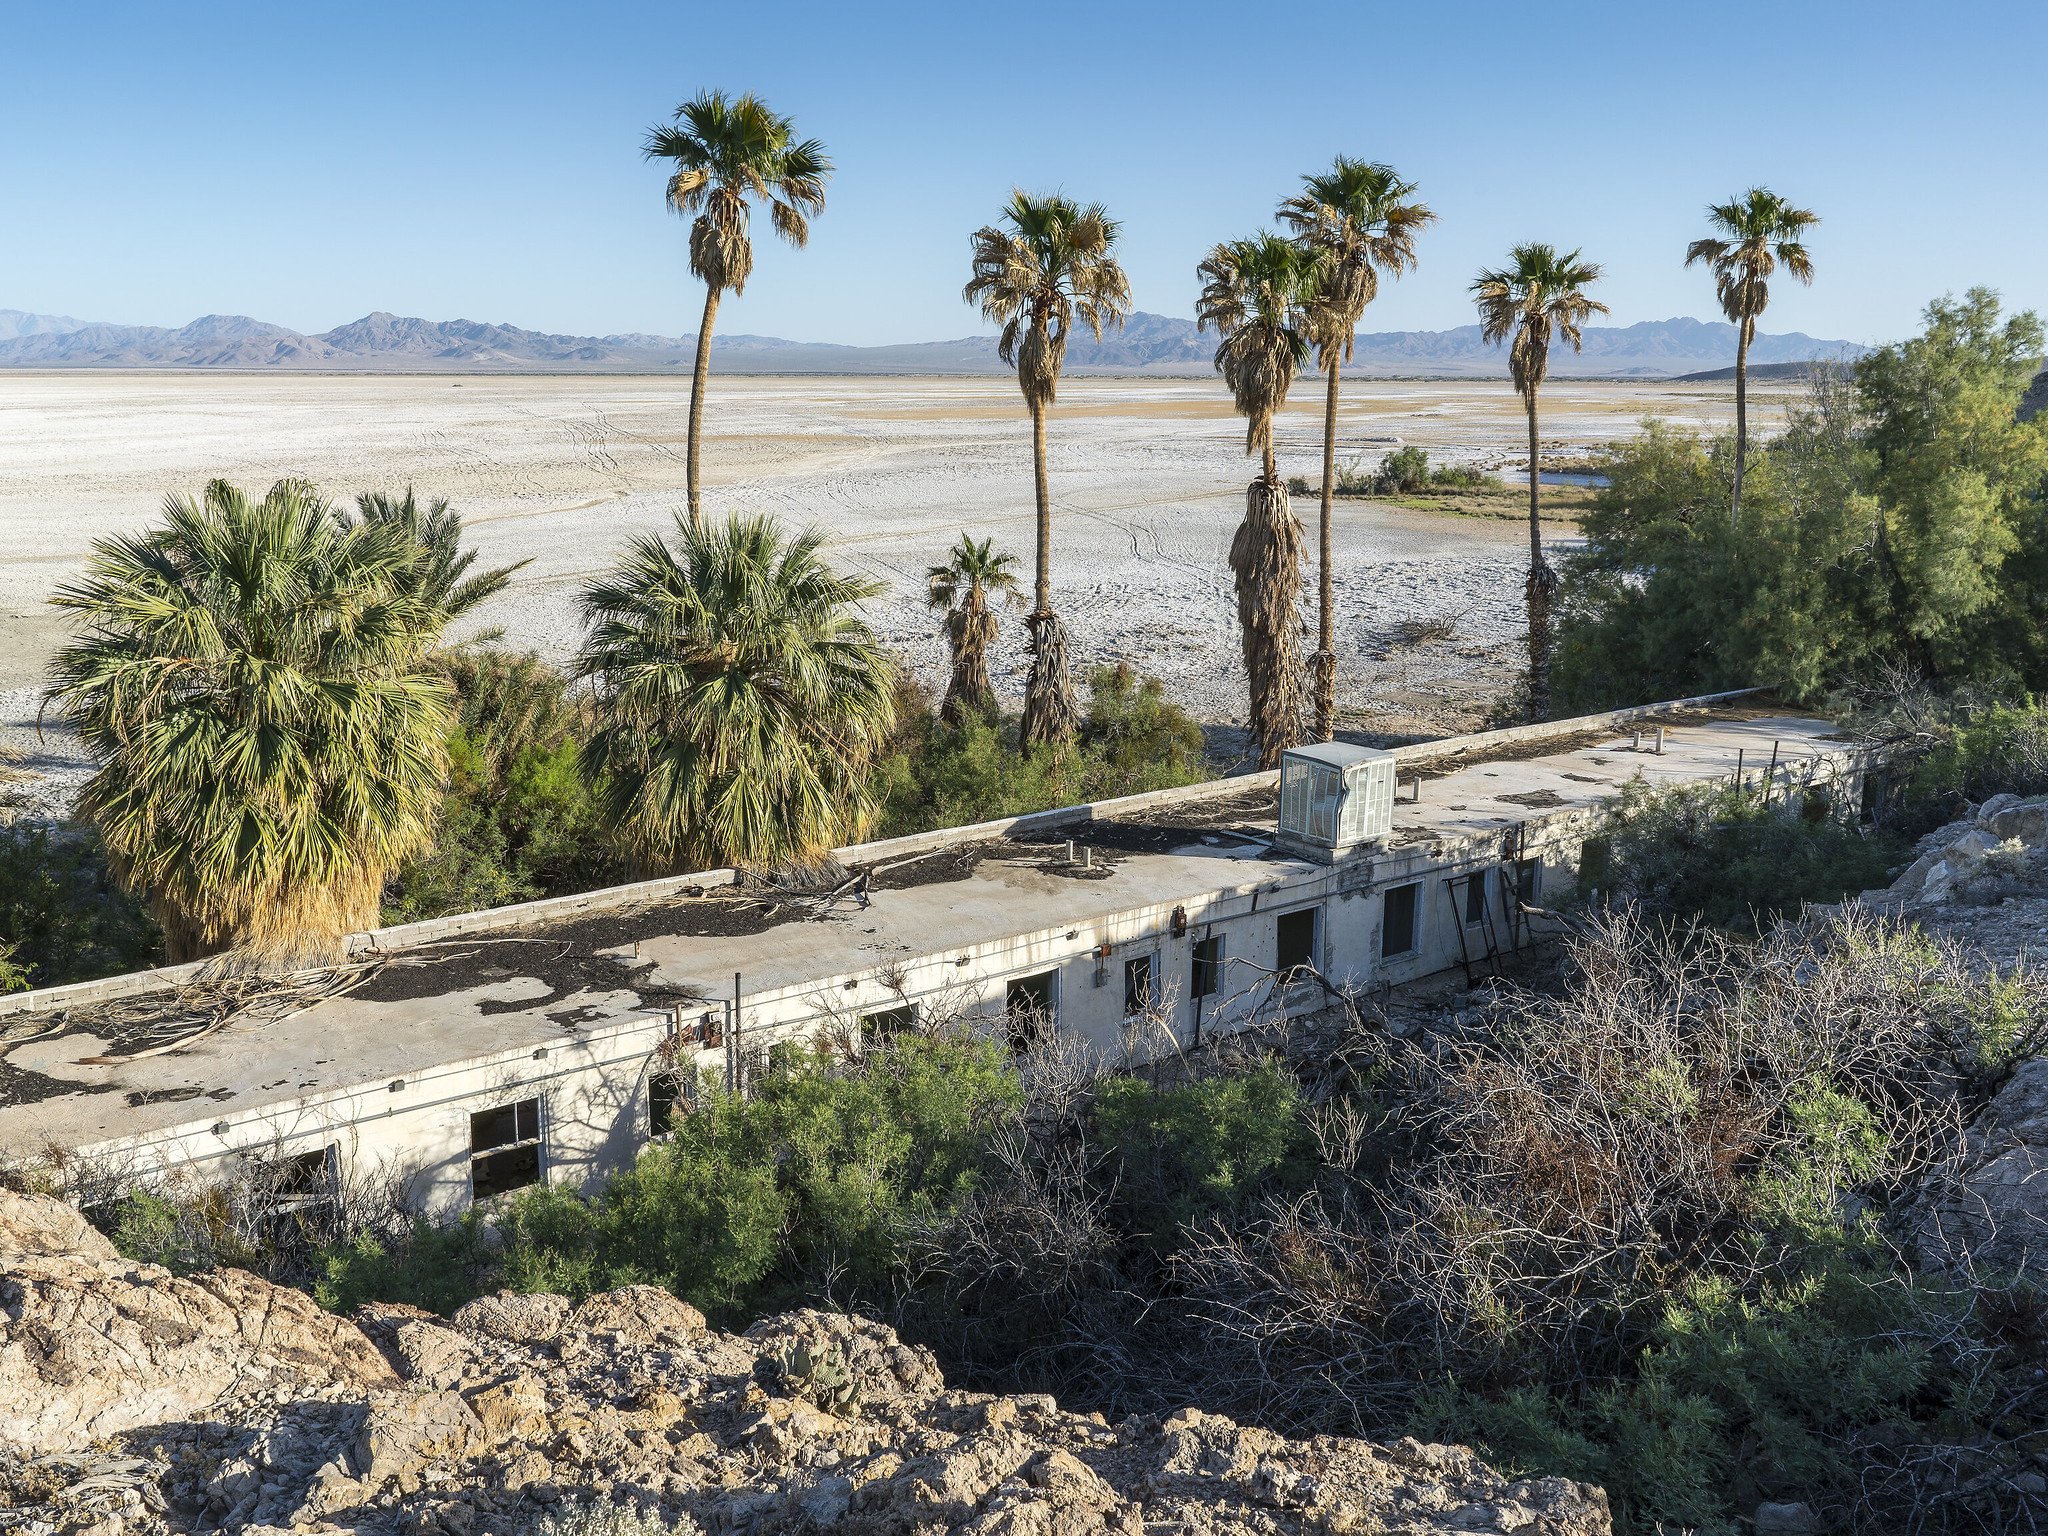  Kim Stringfellow,  Zzyzx Mineral Springs Resort, Zzyzx, CA , 2017, archival pigment prints, edition 1/5, 24 x 36 in, 60 x 91 cm. Image courtesy of the artist 